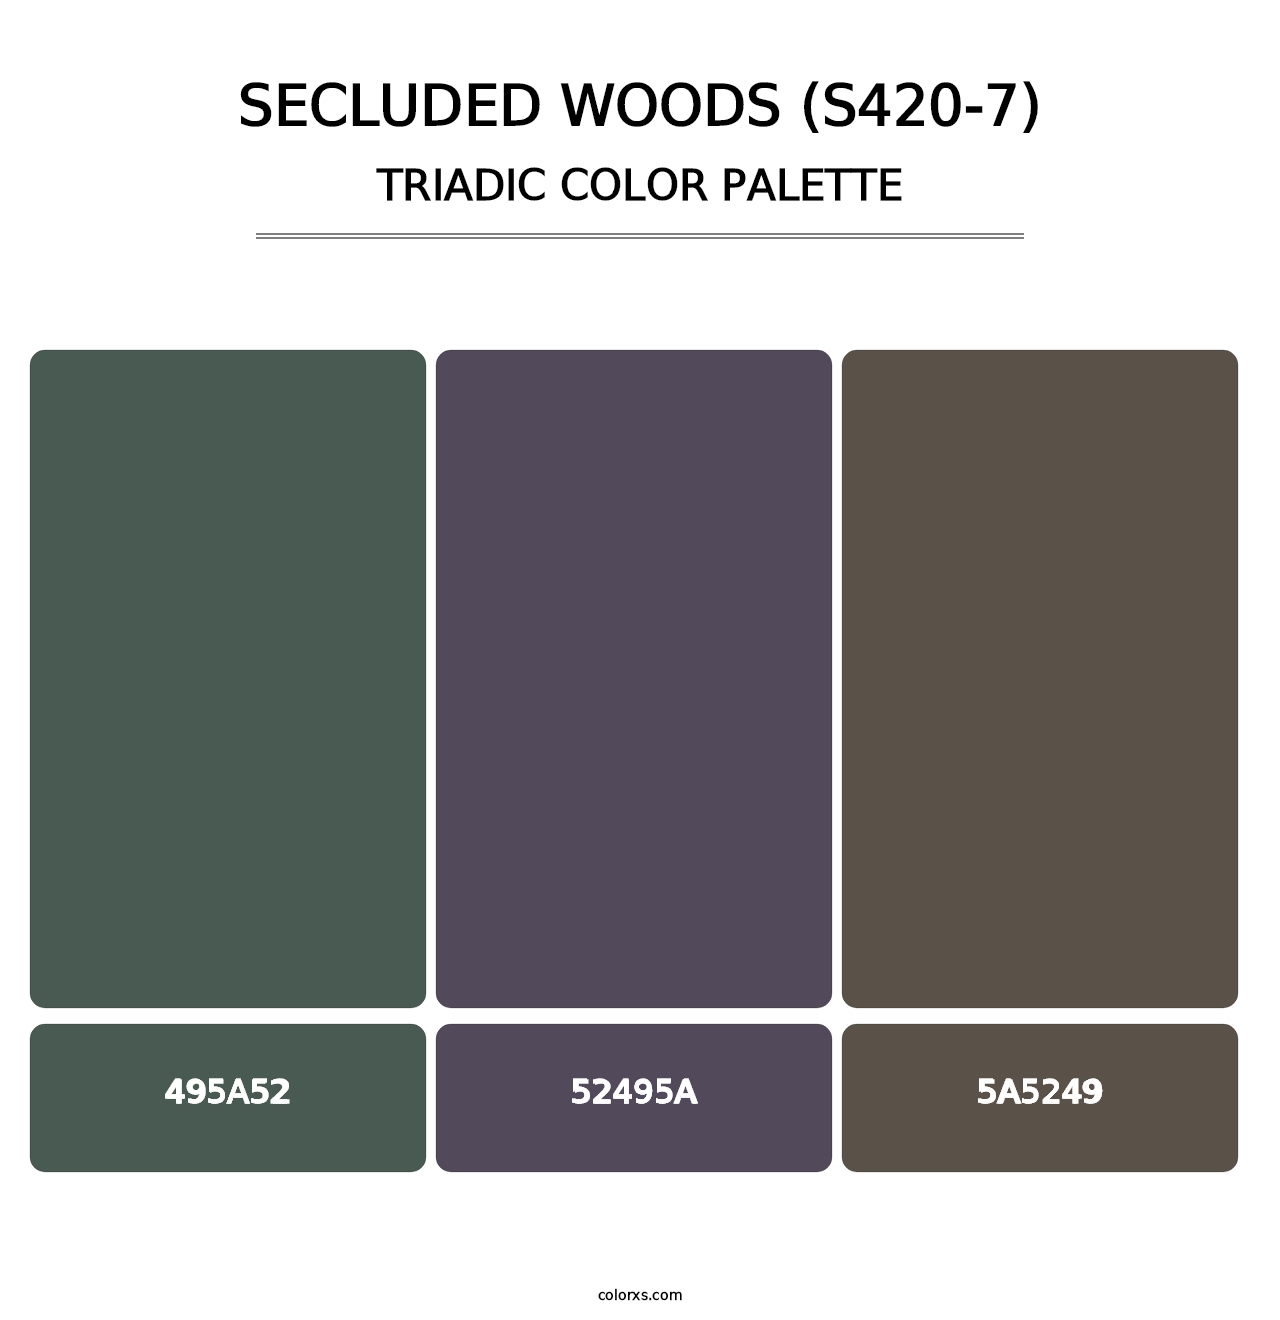 Secluded Woods (S420-7) - Triadic Color Palette